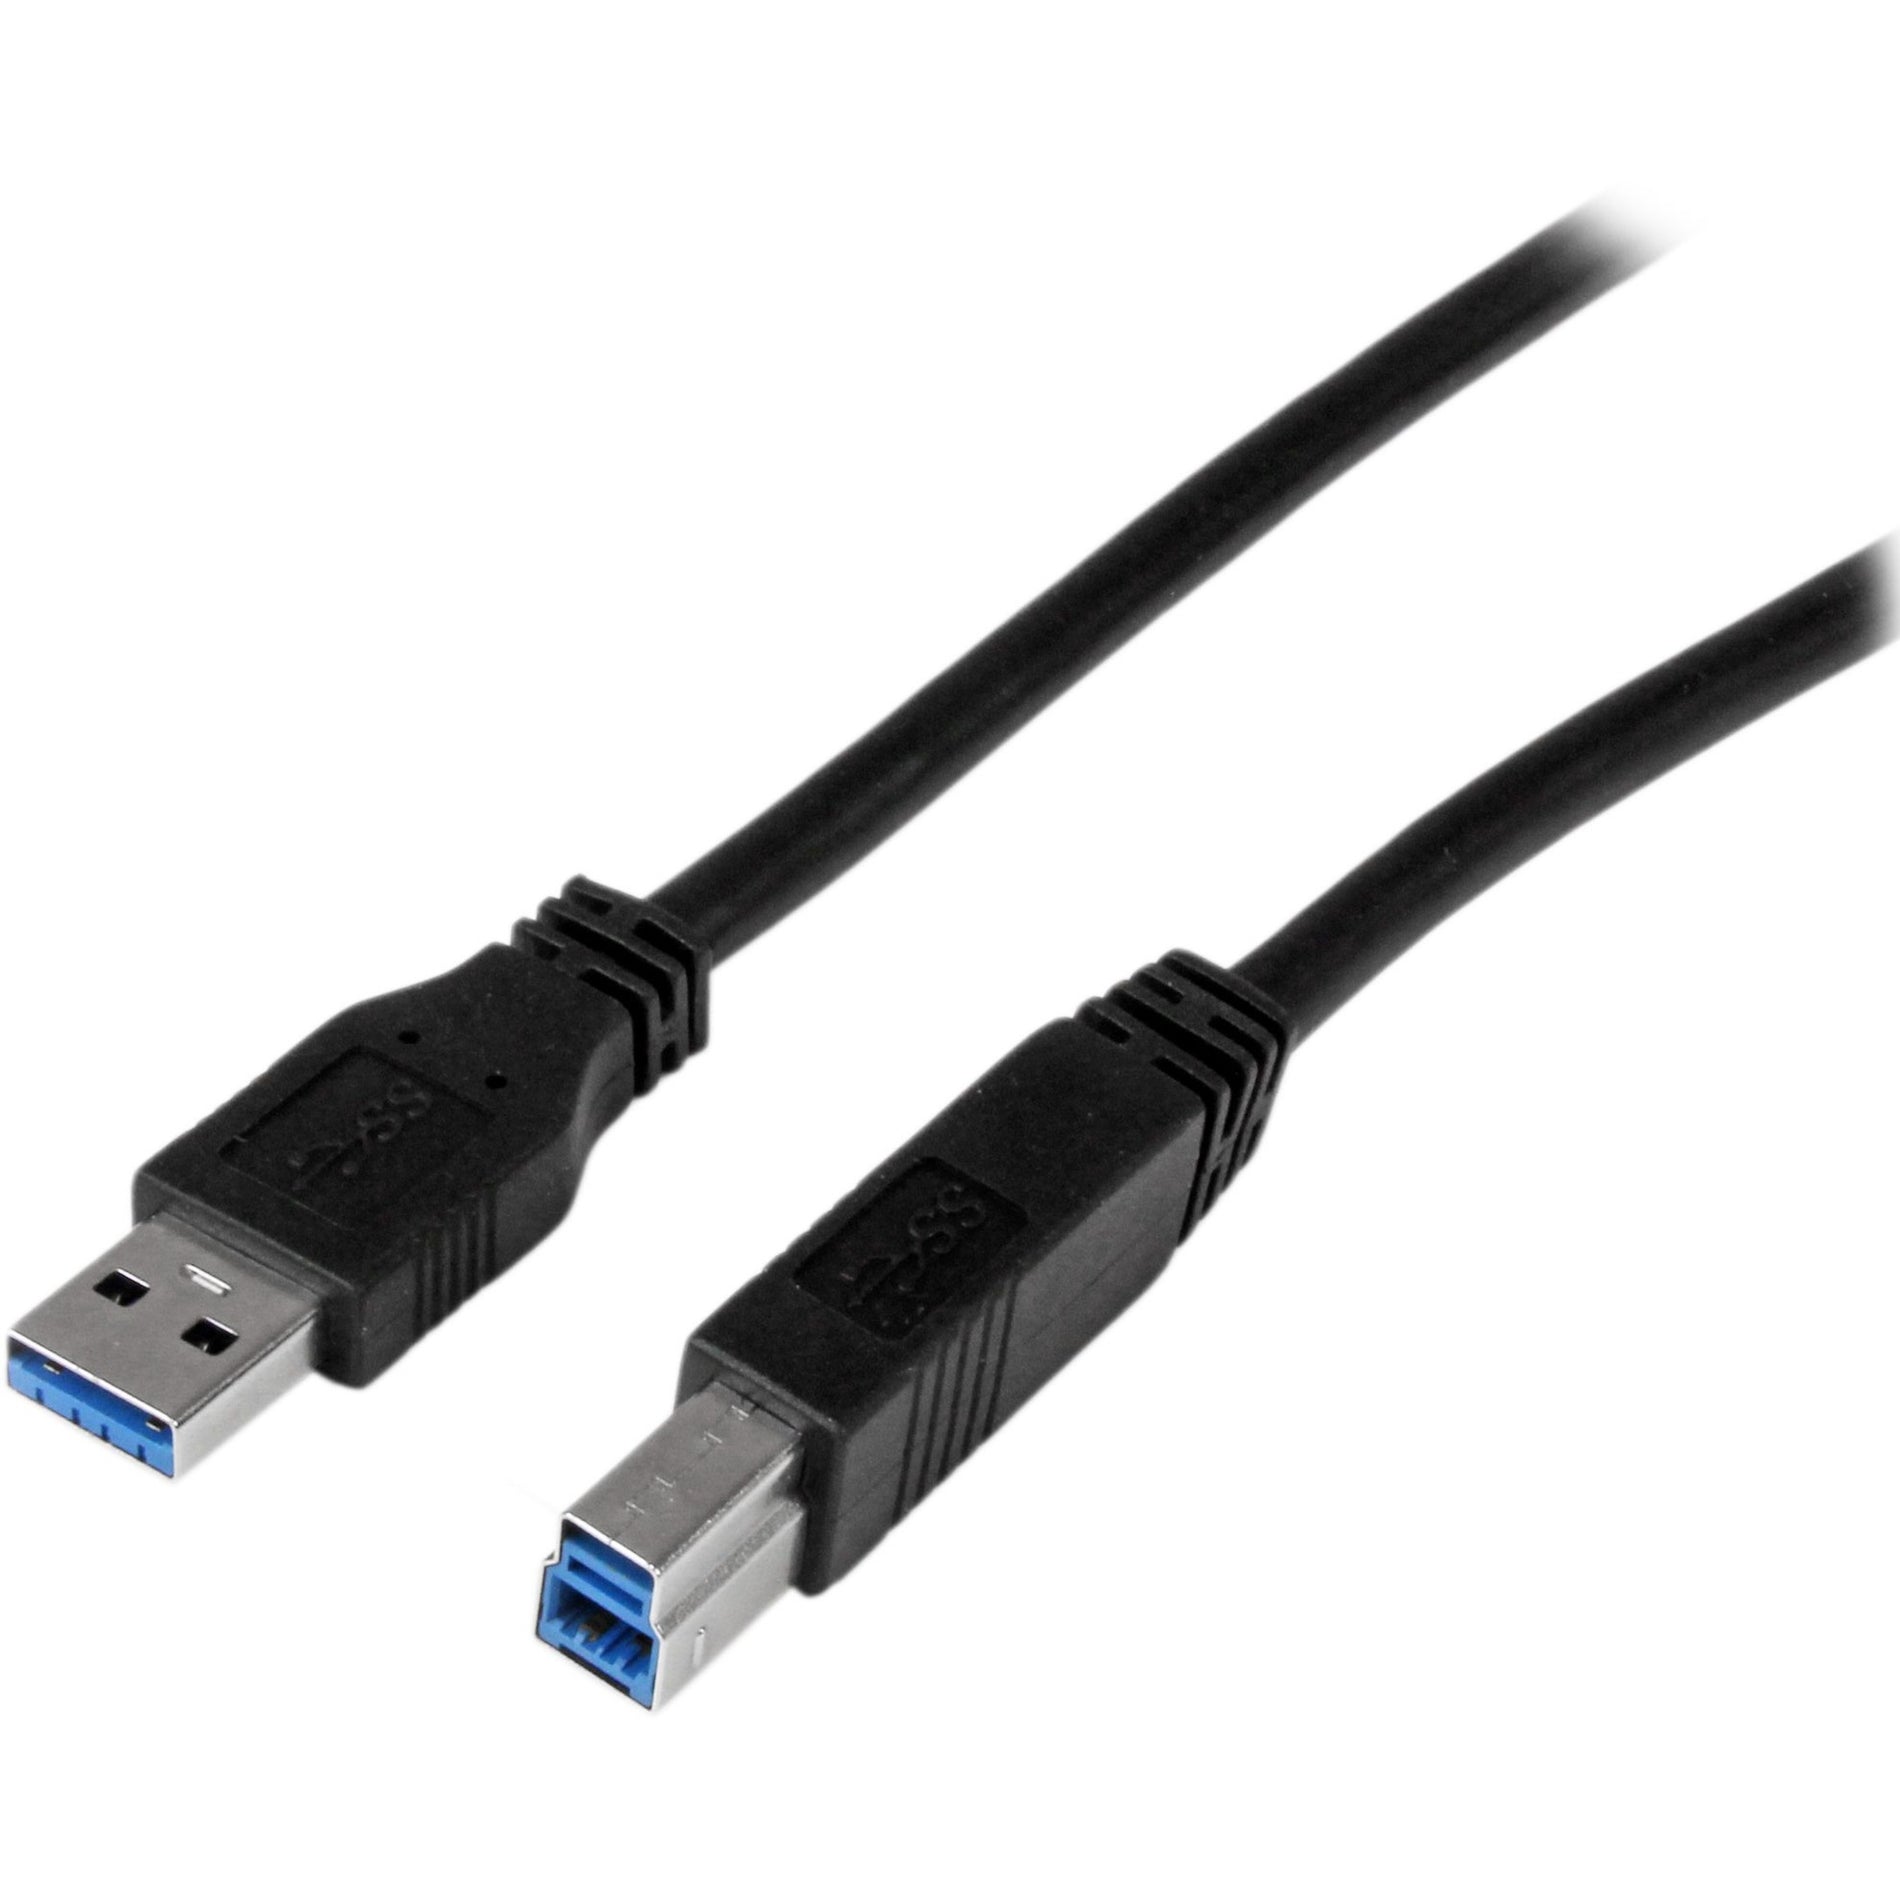 StarTech.com USB3CAB2M 2m Certified SuperSpeed USB 3.0 A to B Cable - M/M, 6 ft Data Transfer Cable